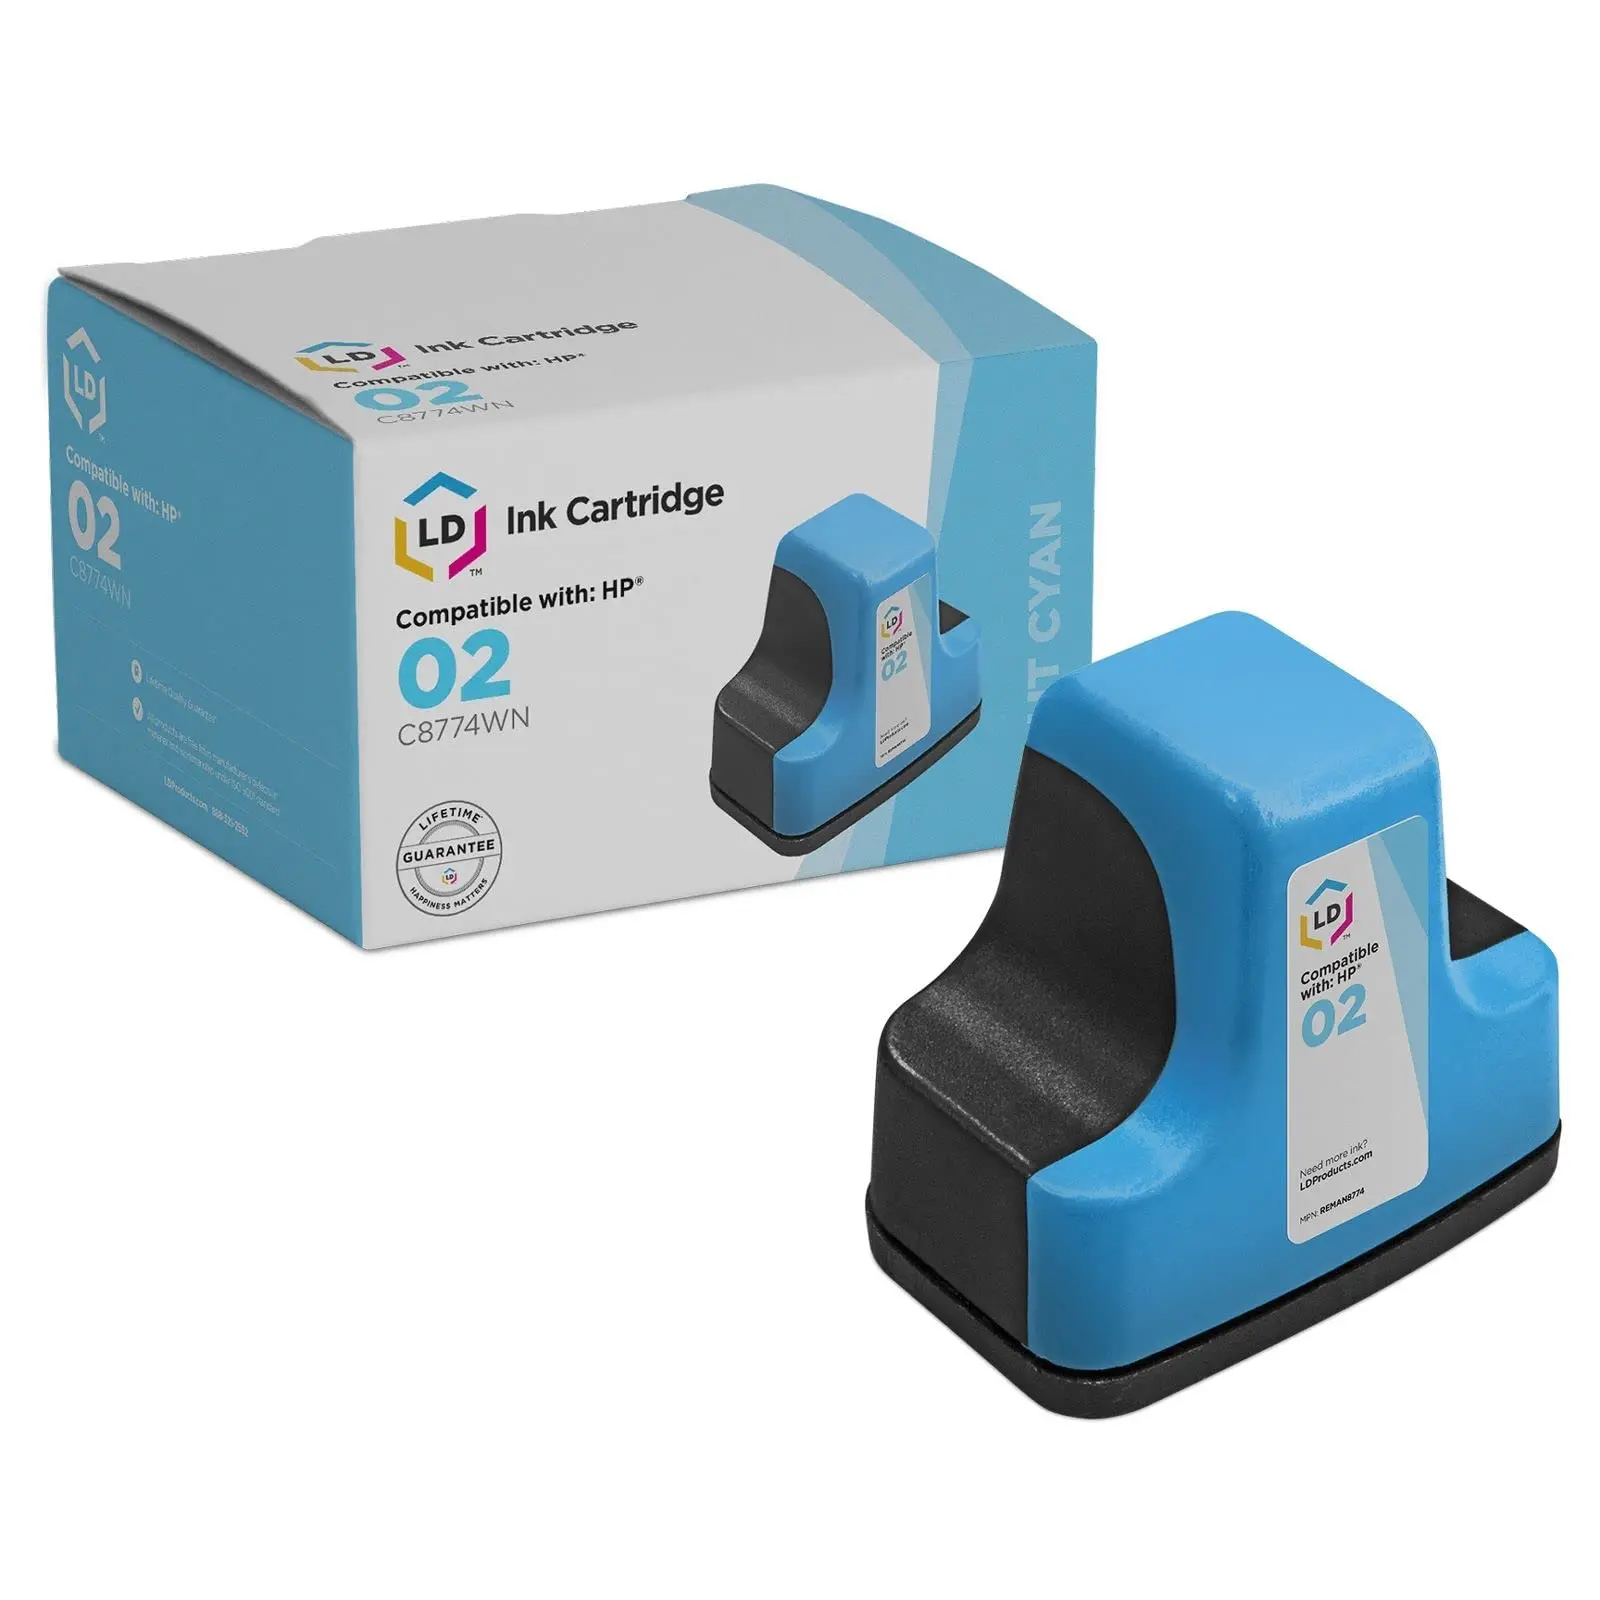 hewlett packard 02 ink cartridges generic - What is HP 302 compatible with